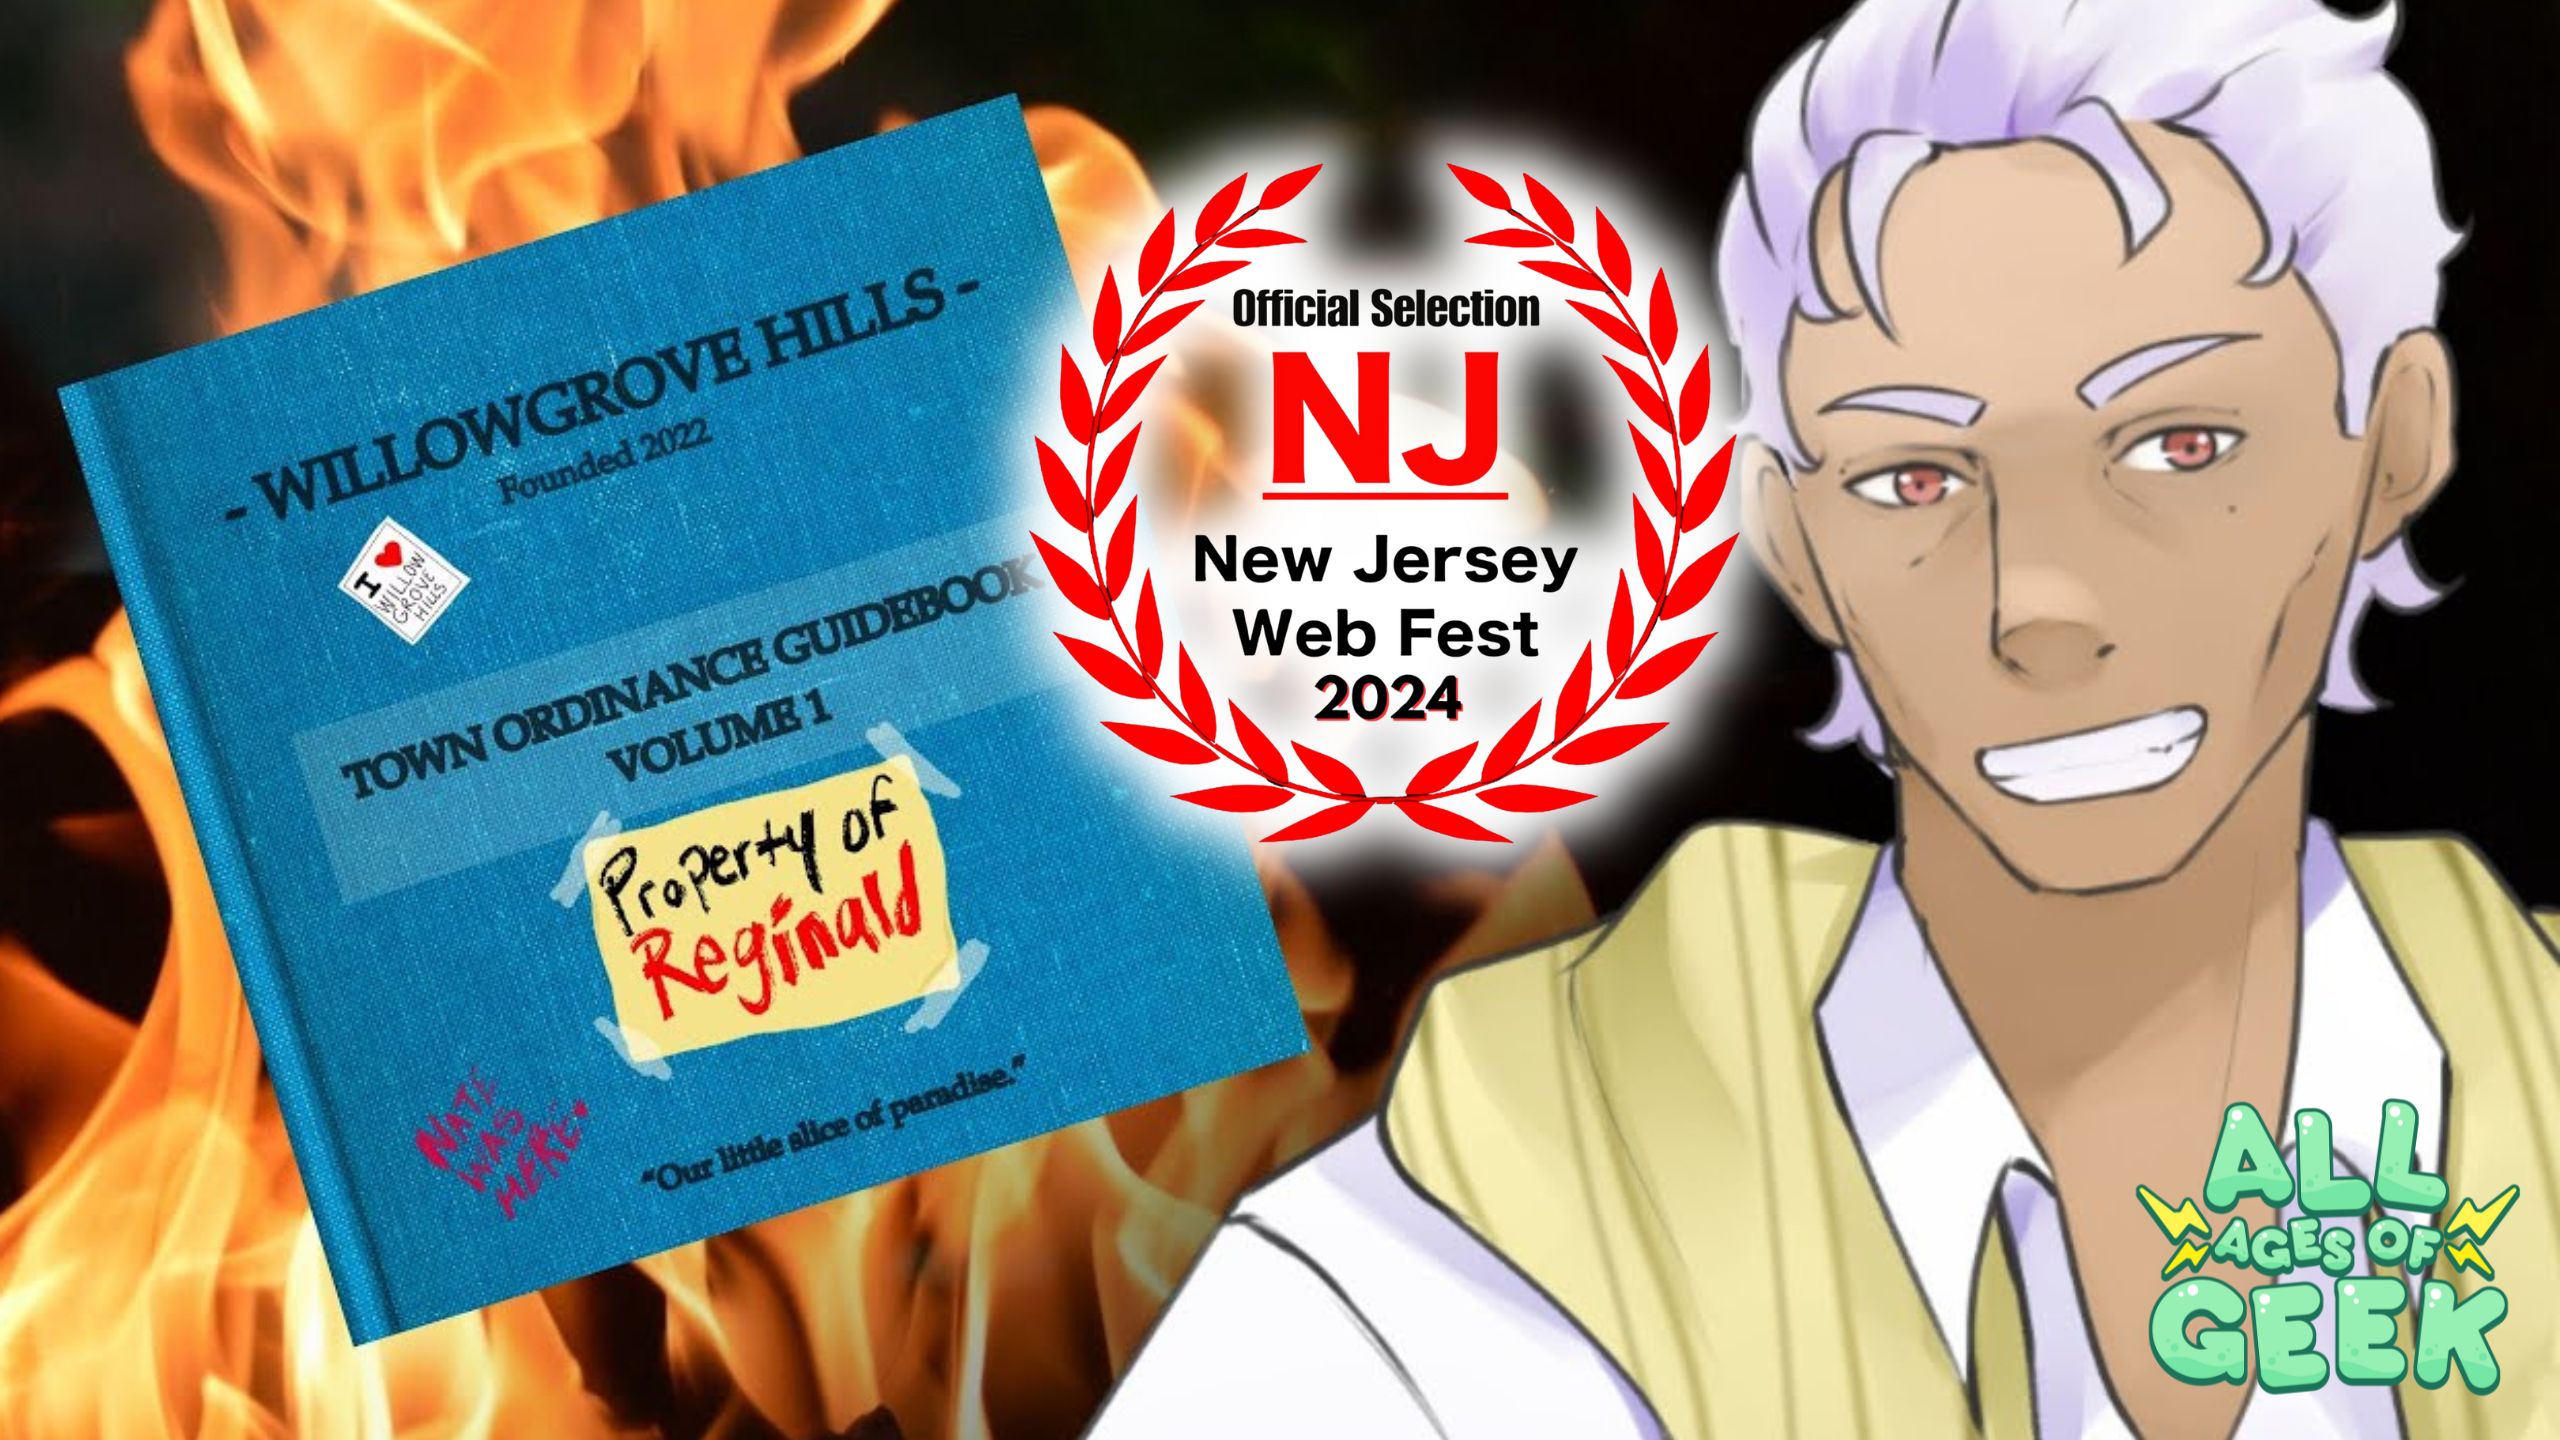 Anime-style character with light purple hair and a white shirt stands next to a burning blue book labeled "Willowgrove Hills Town Ordinance Guidebook Volume 1" with a sticker "Property of Reginald" on it. A red laurel wreath with "Official Selection NJ New Jersey Web Fest 2024" is displayed prominently, with the All Ages of Geek logo in the bottom right corner.